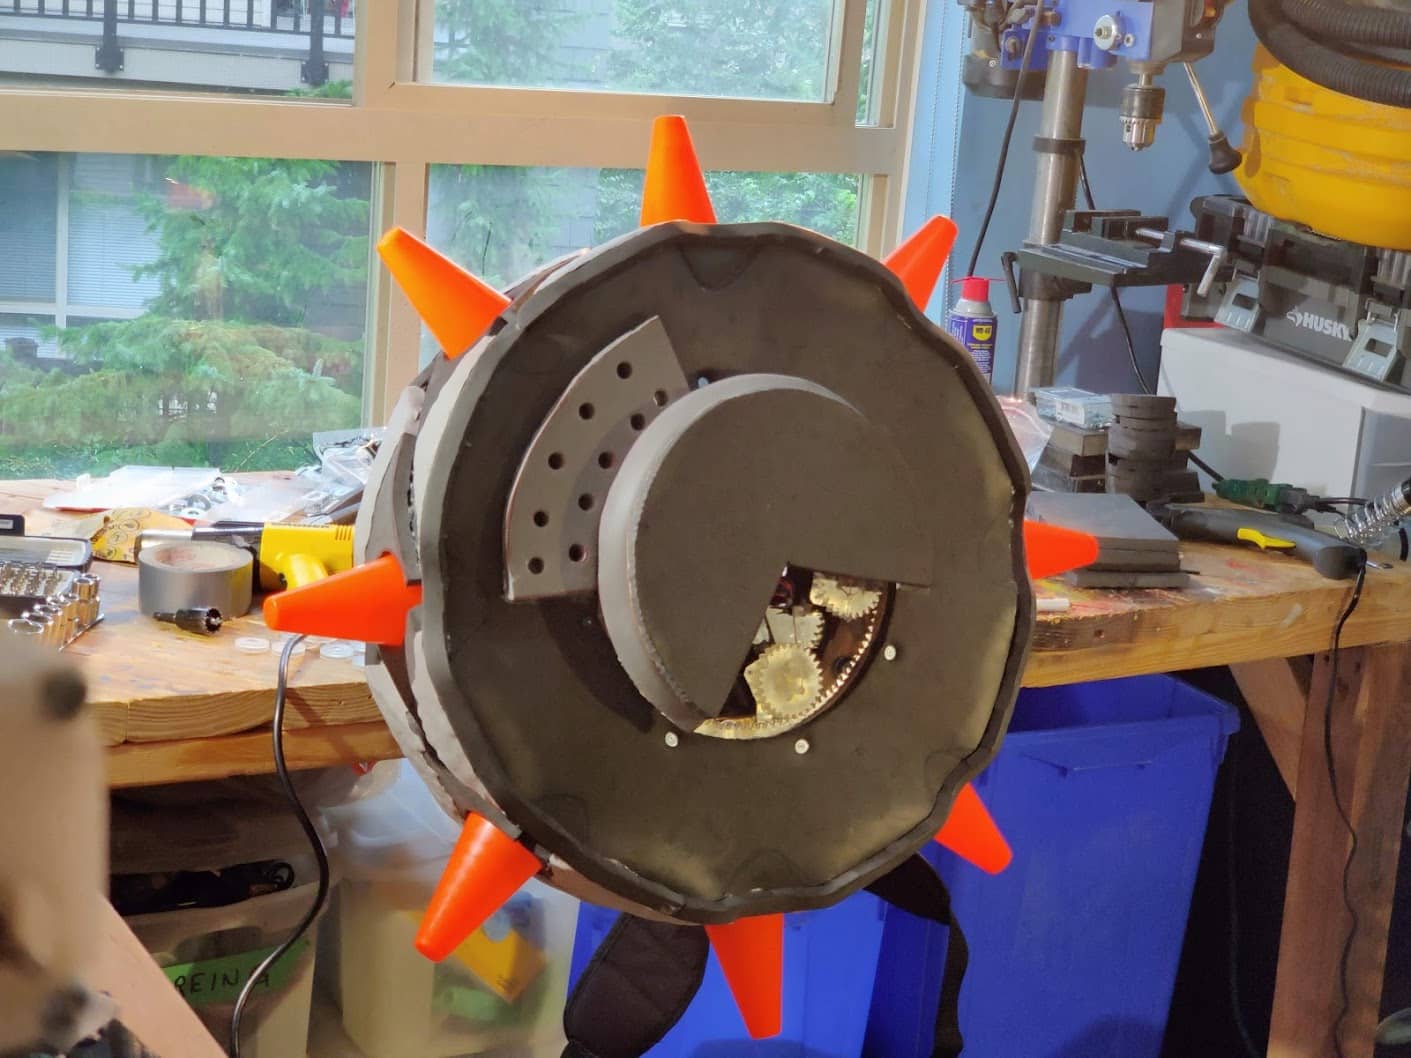 JunkRat Tire with Spikes installed for fit testing